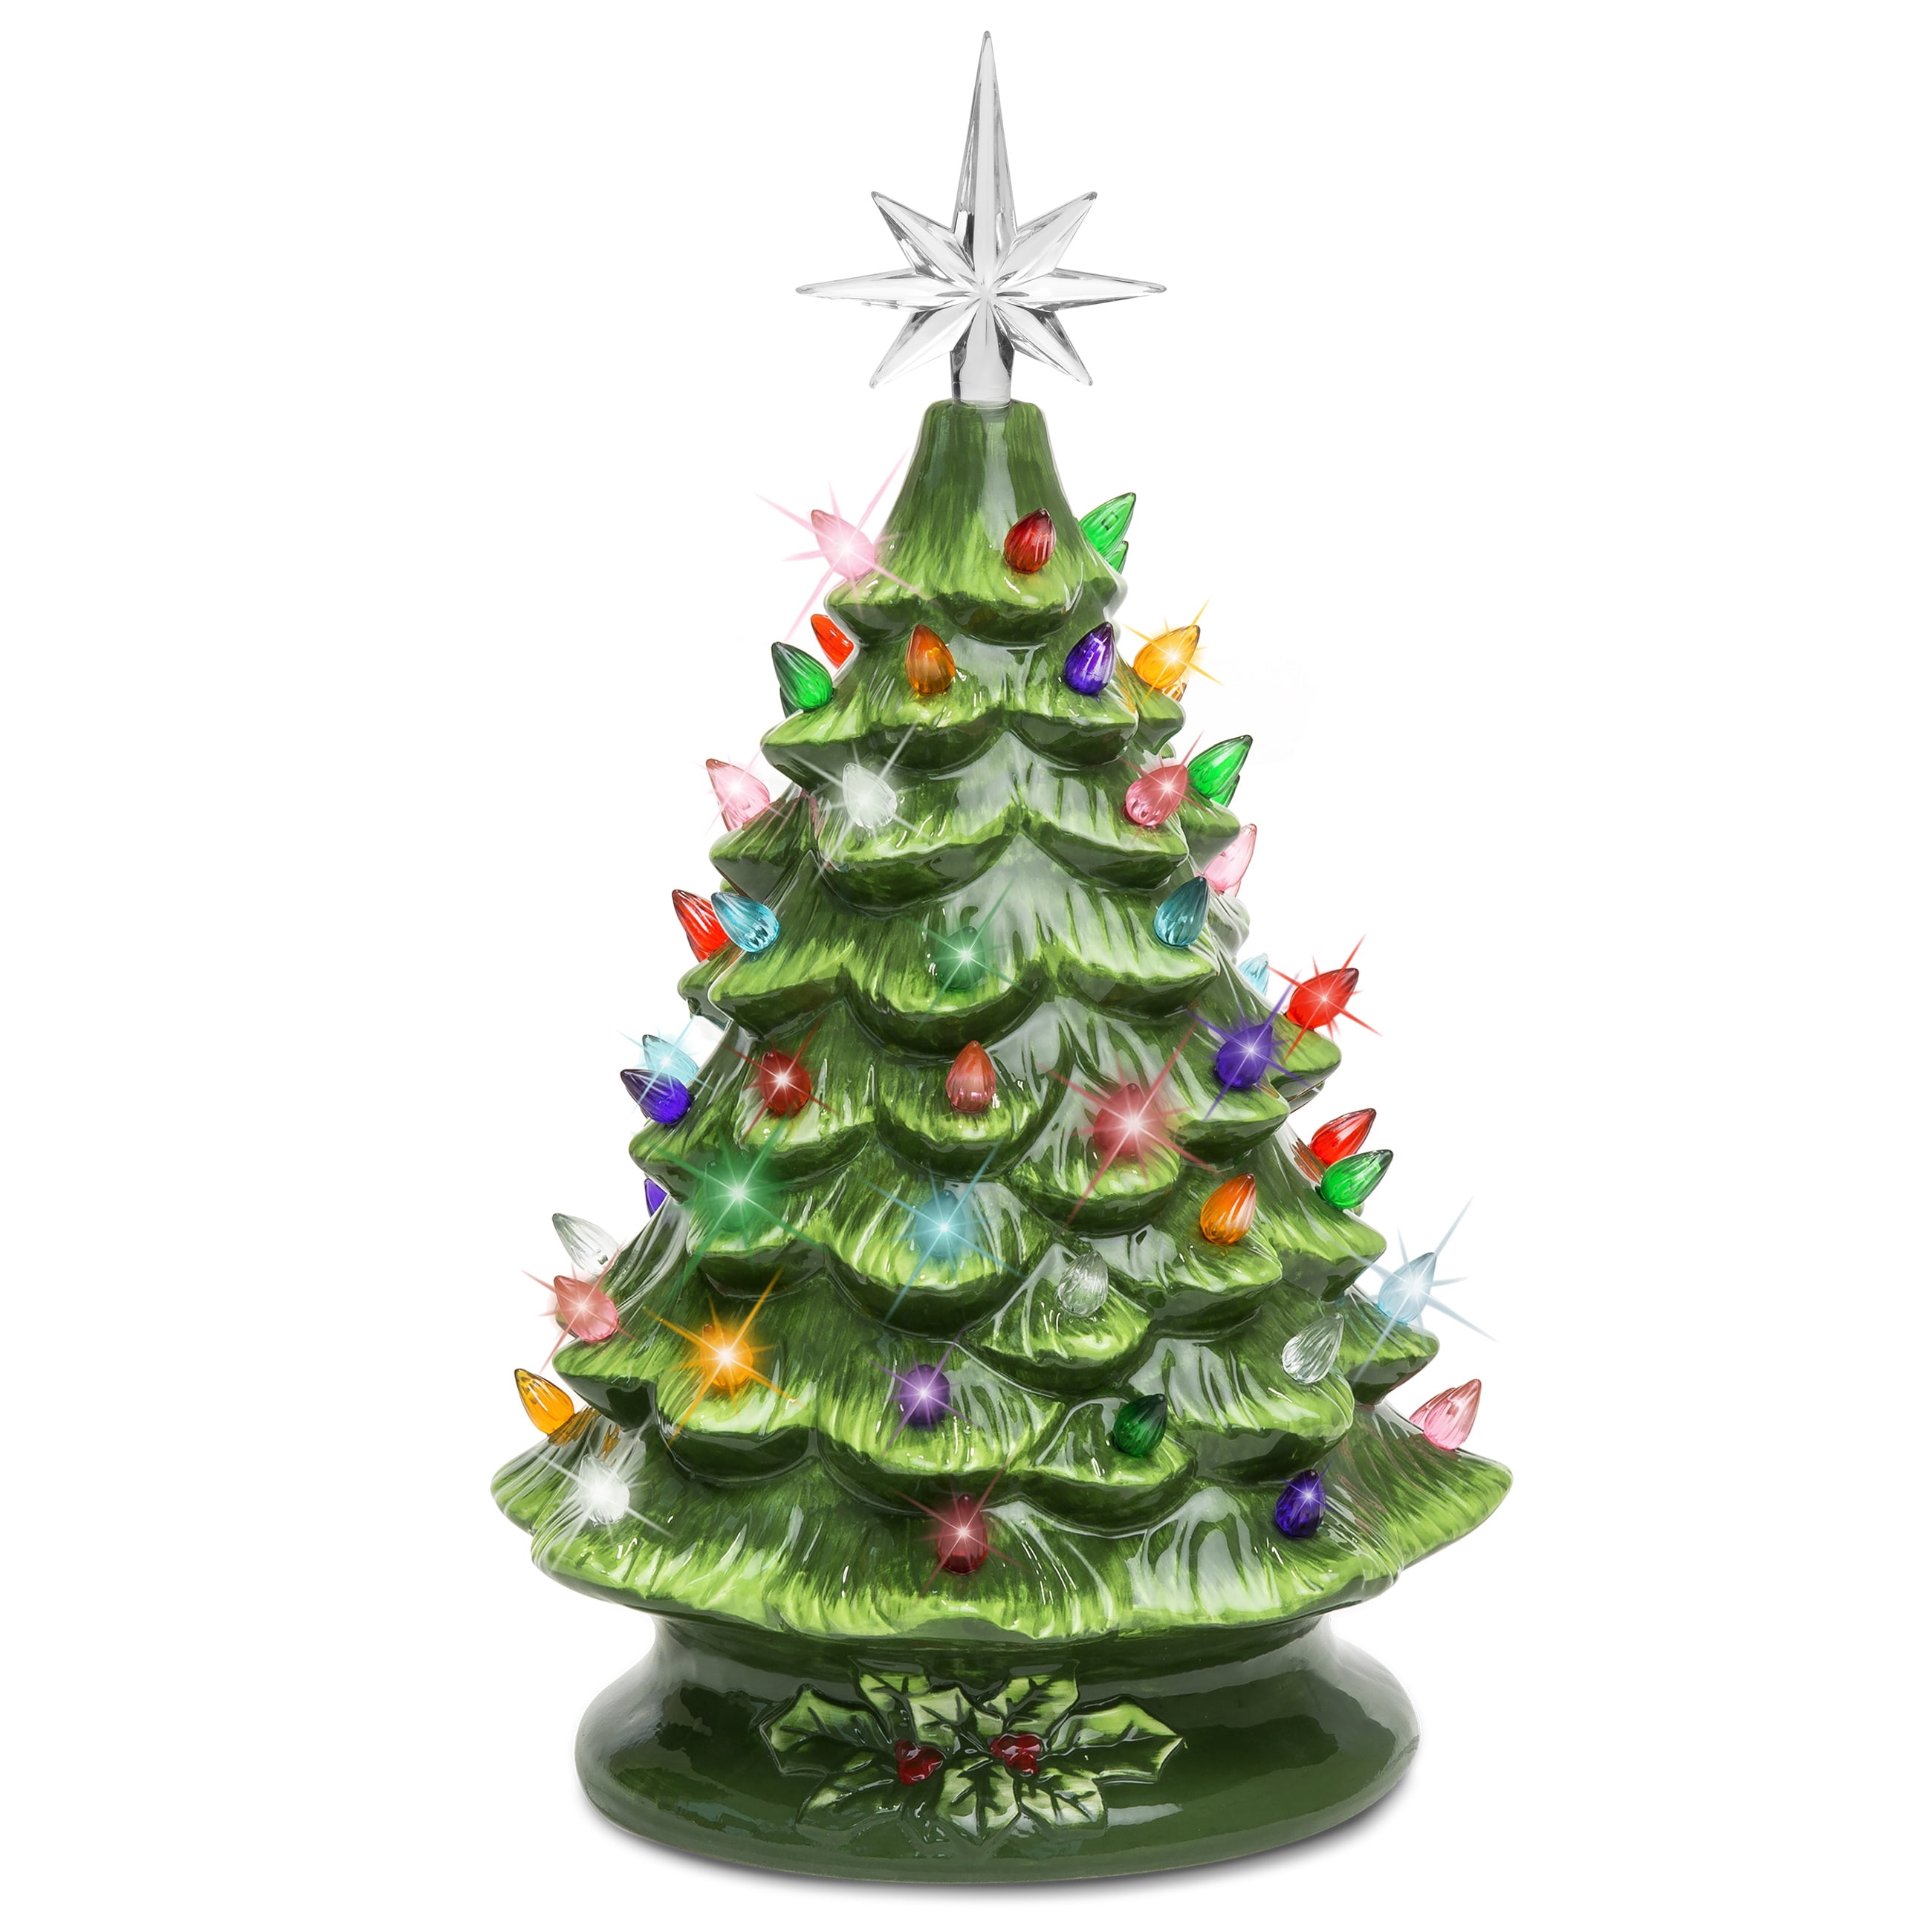 Best Choice Products 15in Ceramic Christmas Tree, Pre-lit Hand-Painted Holiday Decor w/ 64 Lights - Green w/ Multicolor Bulbs - image 1 of 7